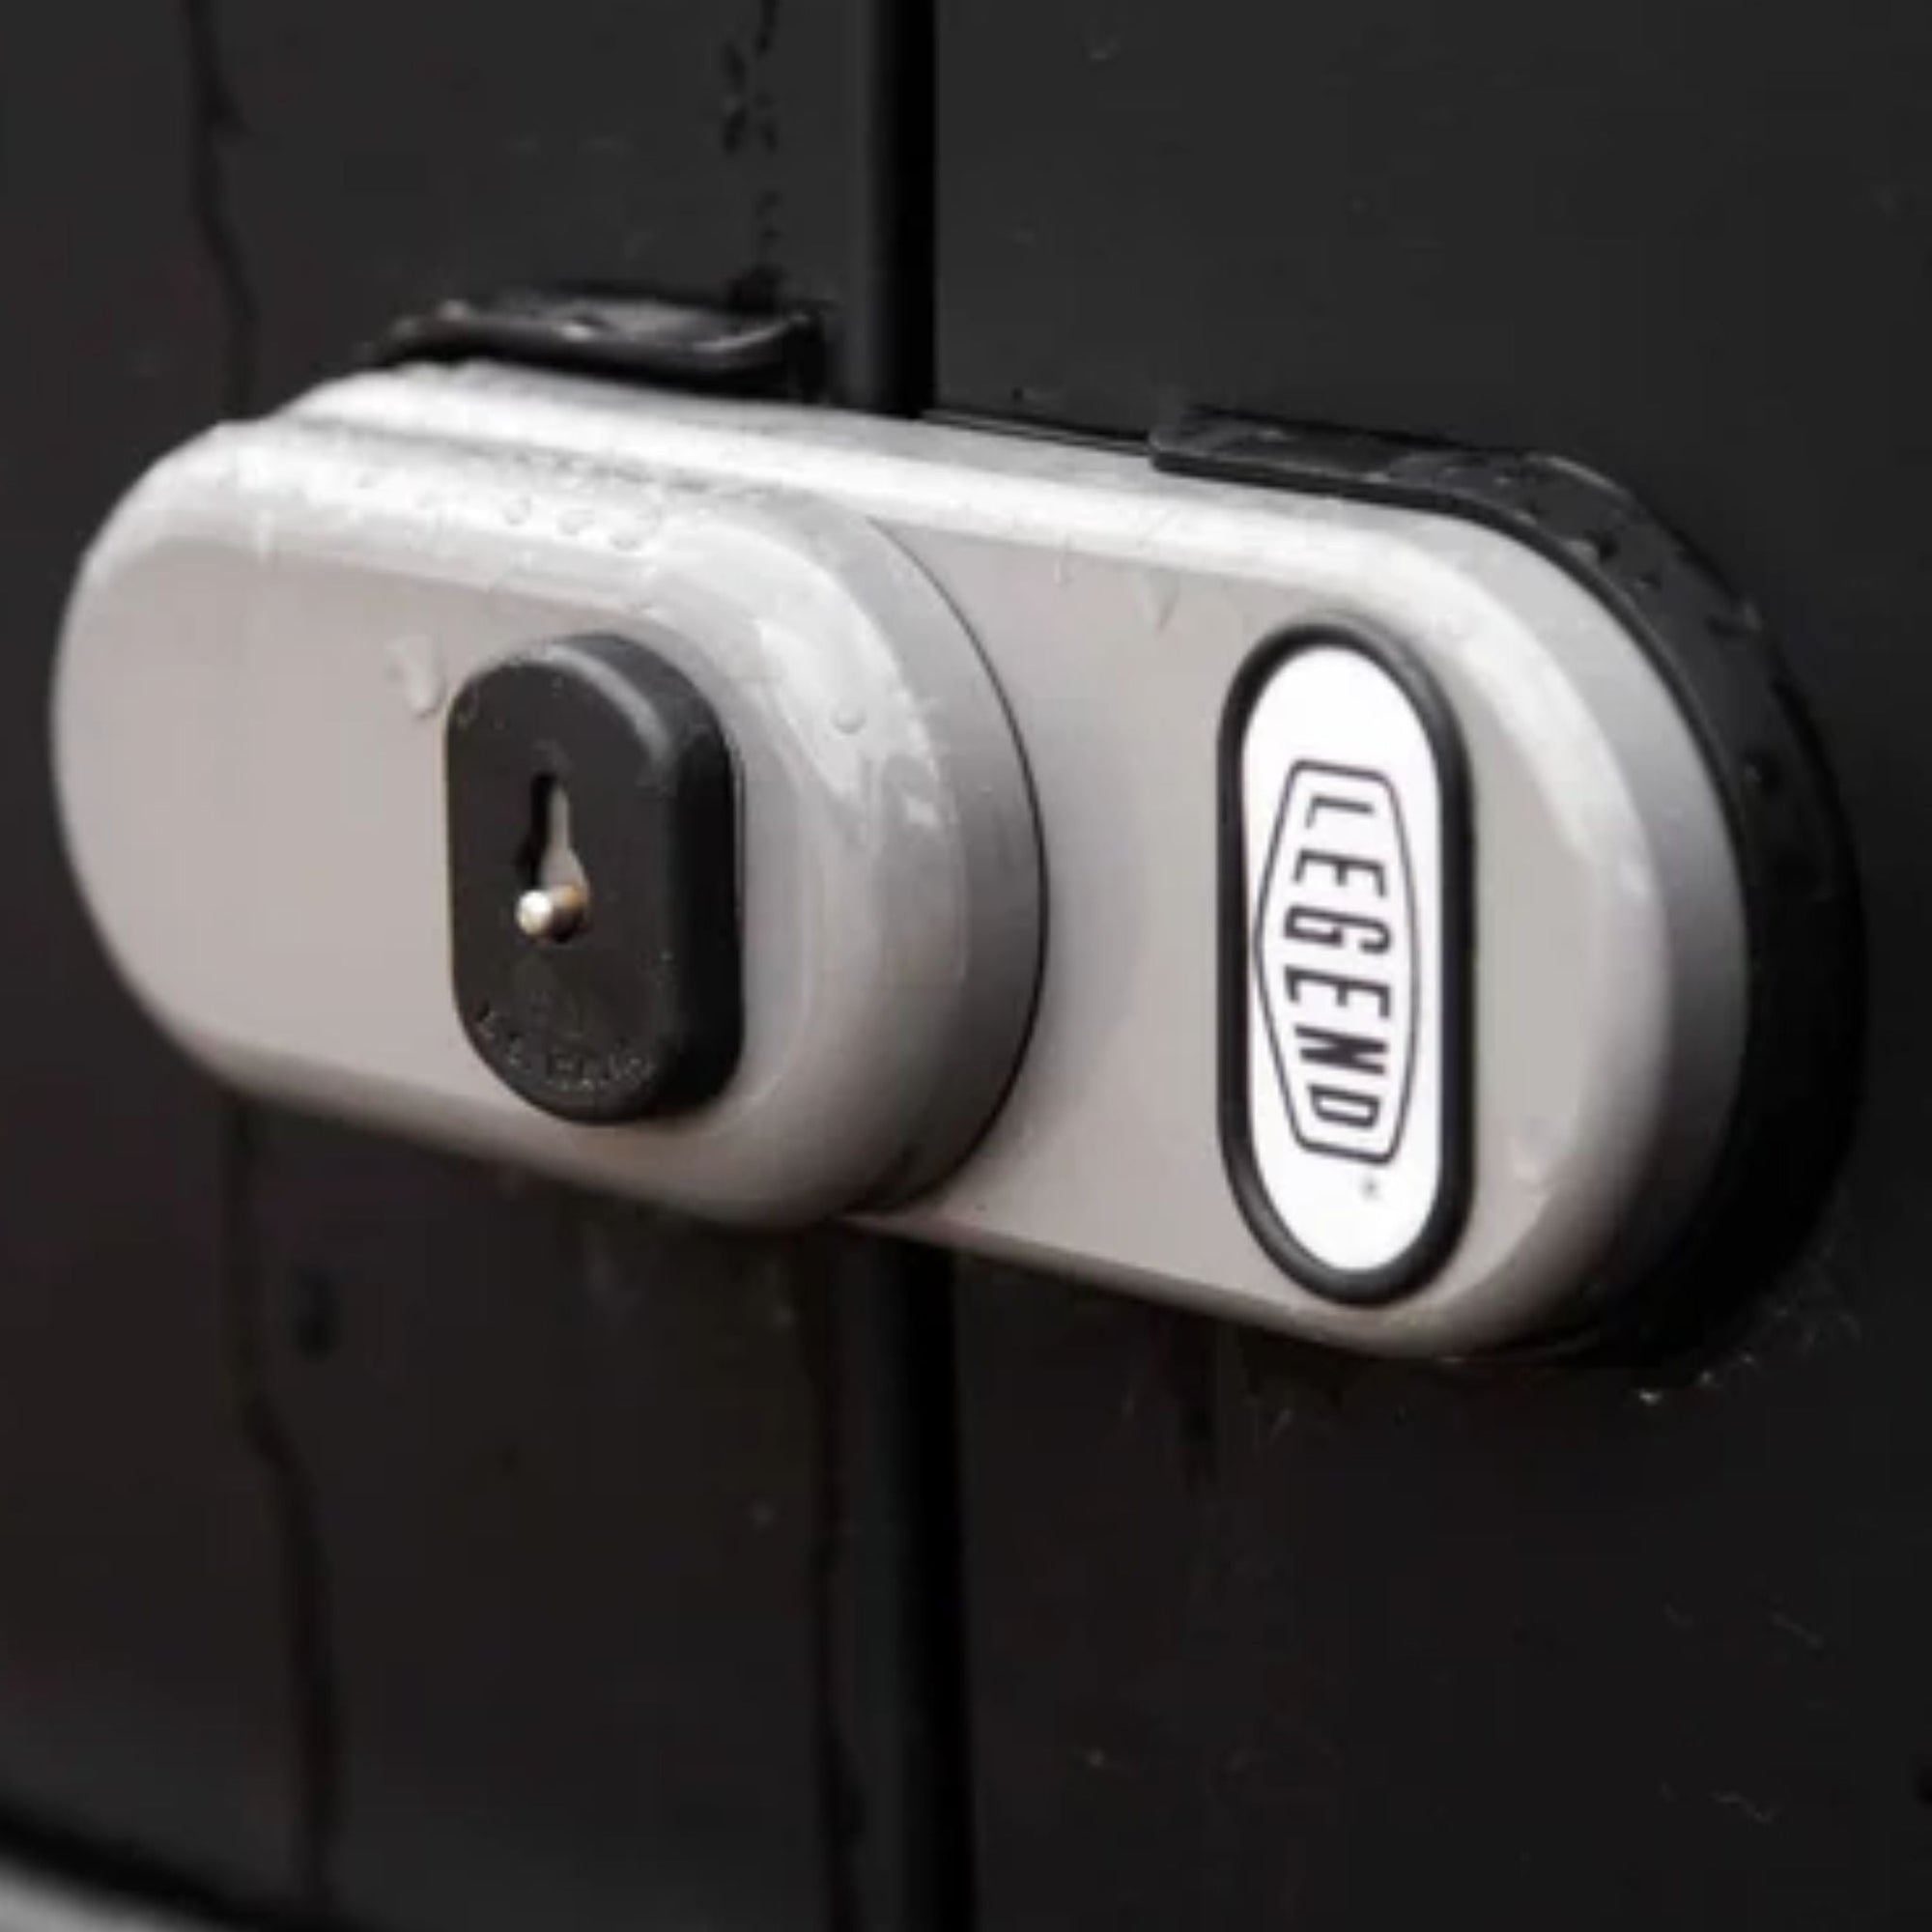 The SecuriLock Van Door Dead Lock That Actually Prevents Cargo Theft in Vans in High Crime Urban Areas and Vocations Holding Expensive Tools, Equipment and Cargos - The Lock Source